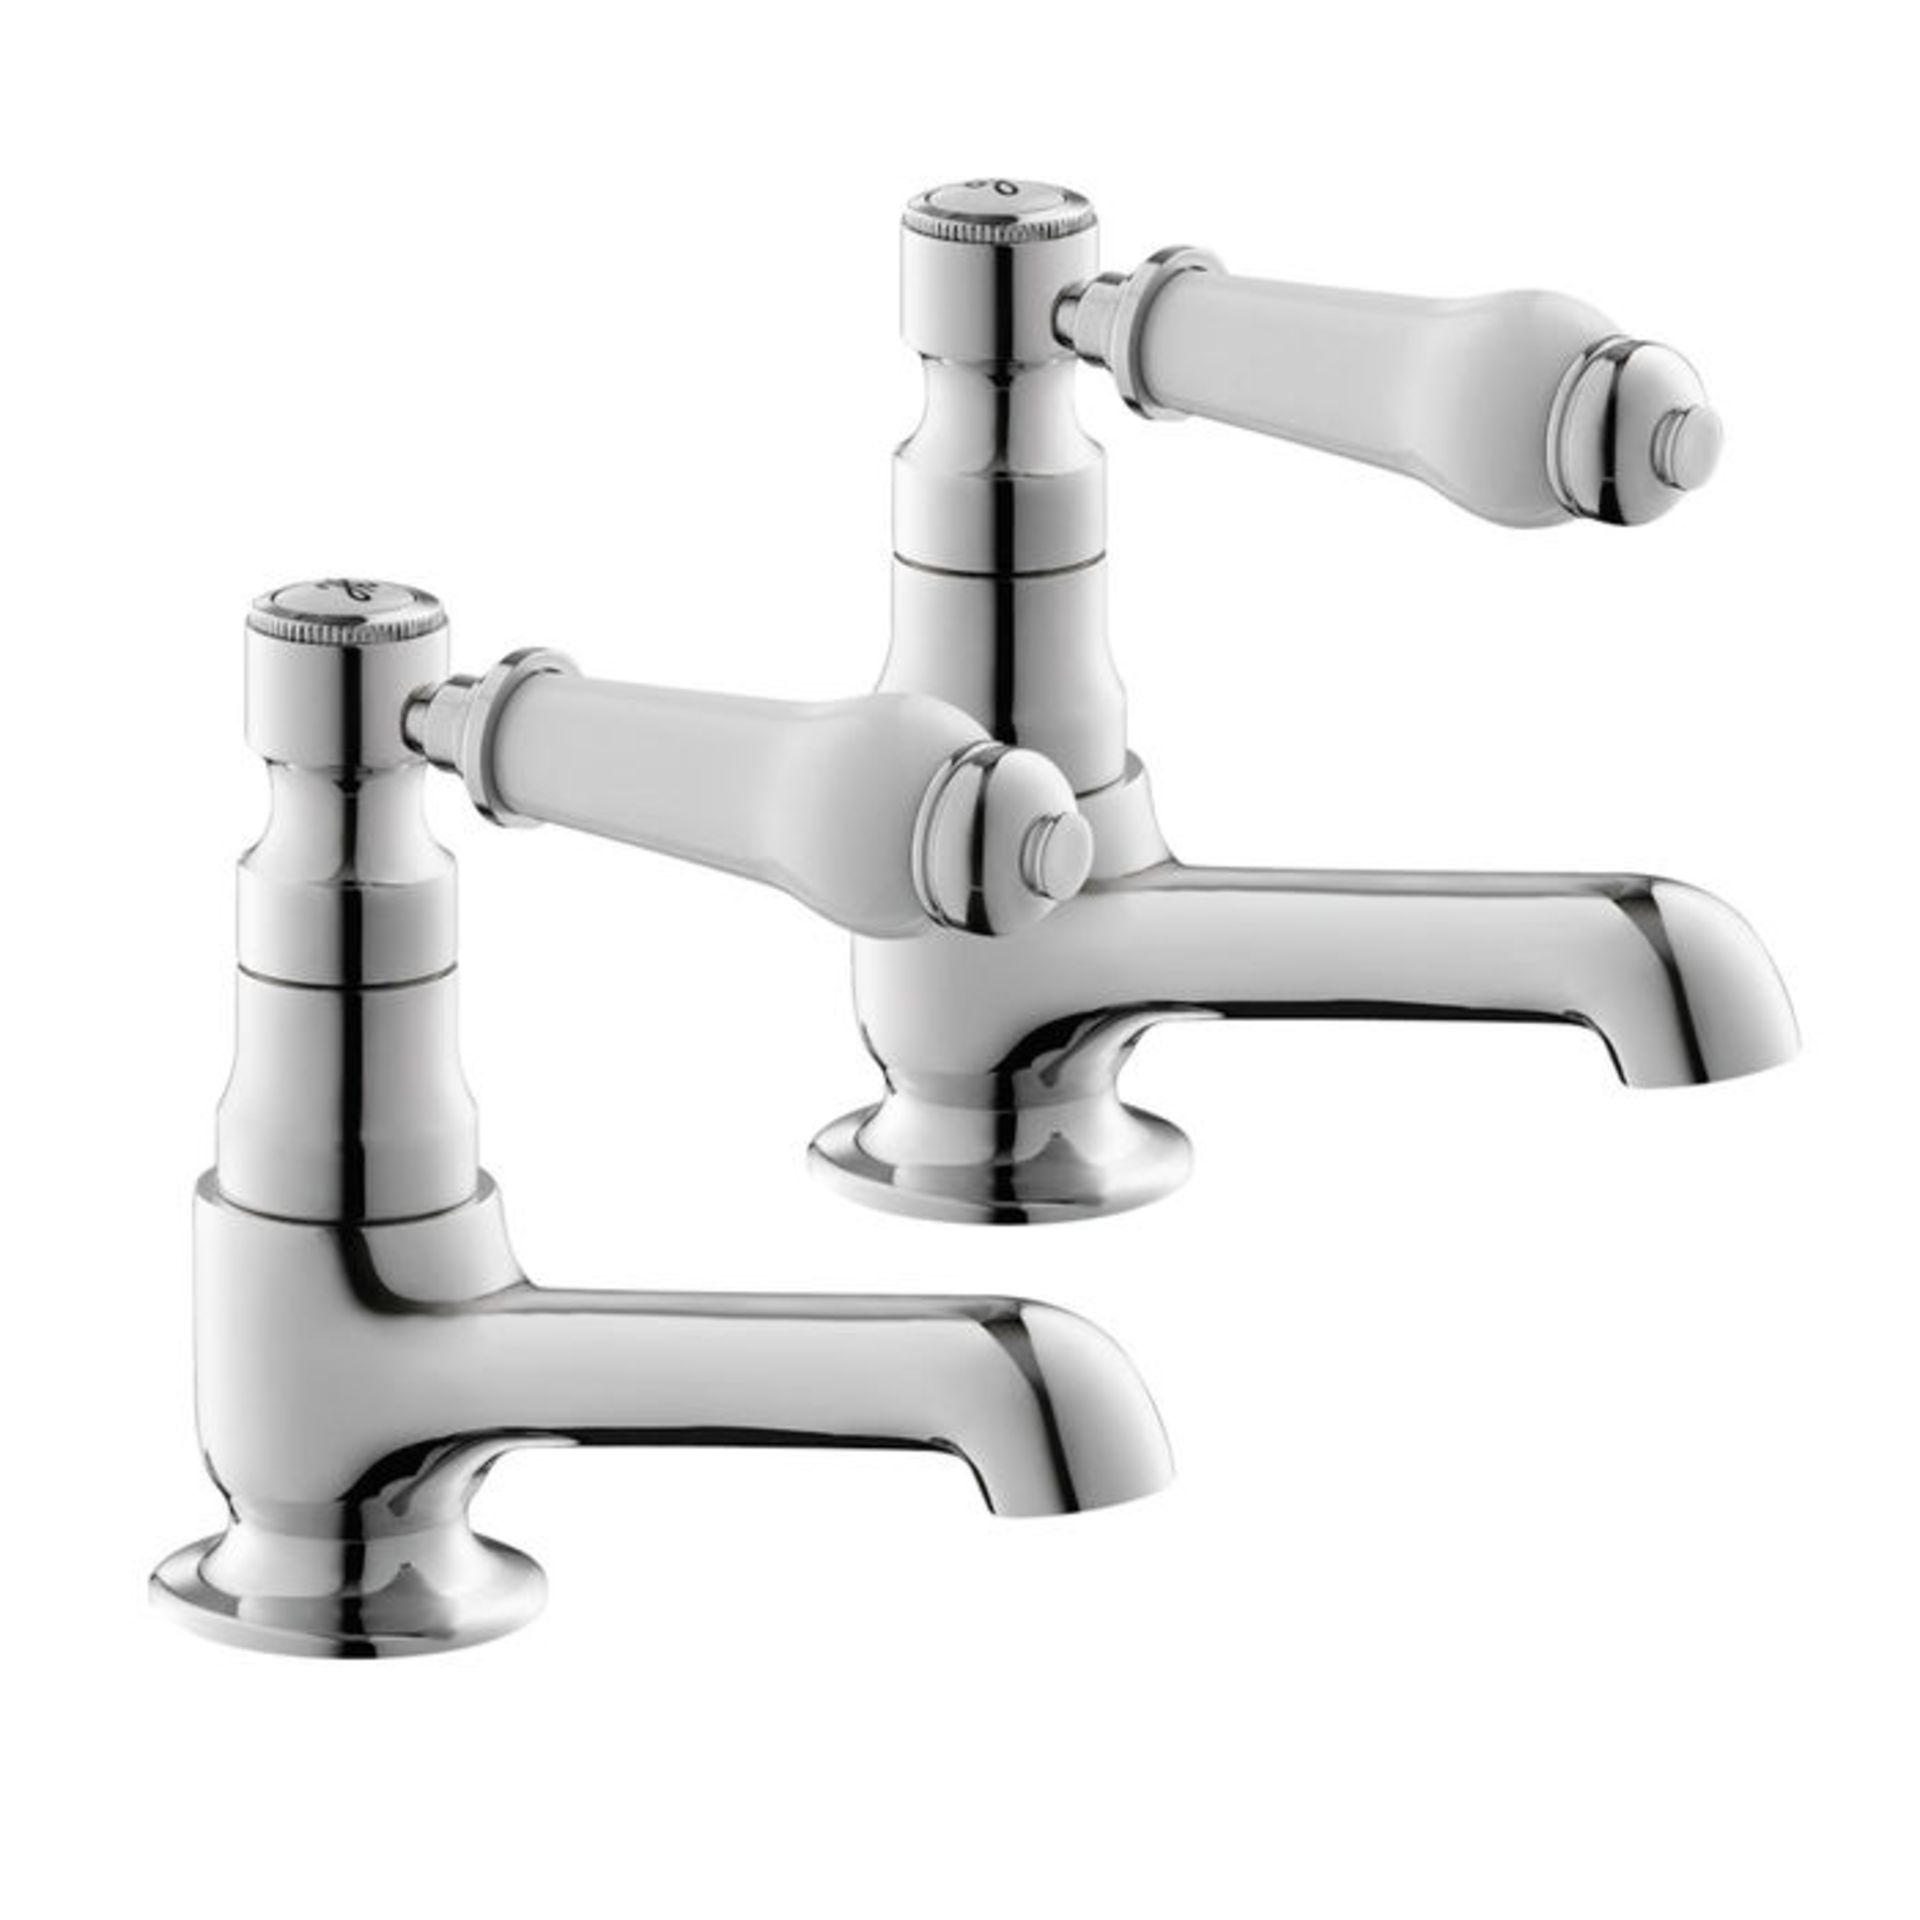 (G28) Regal Twin Hot & Cold Traditional Chrome Lever Bath Tub Taps Chrome Plated Solid Brass 1/4 - Image 3 of 3